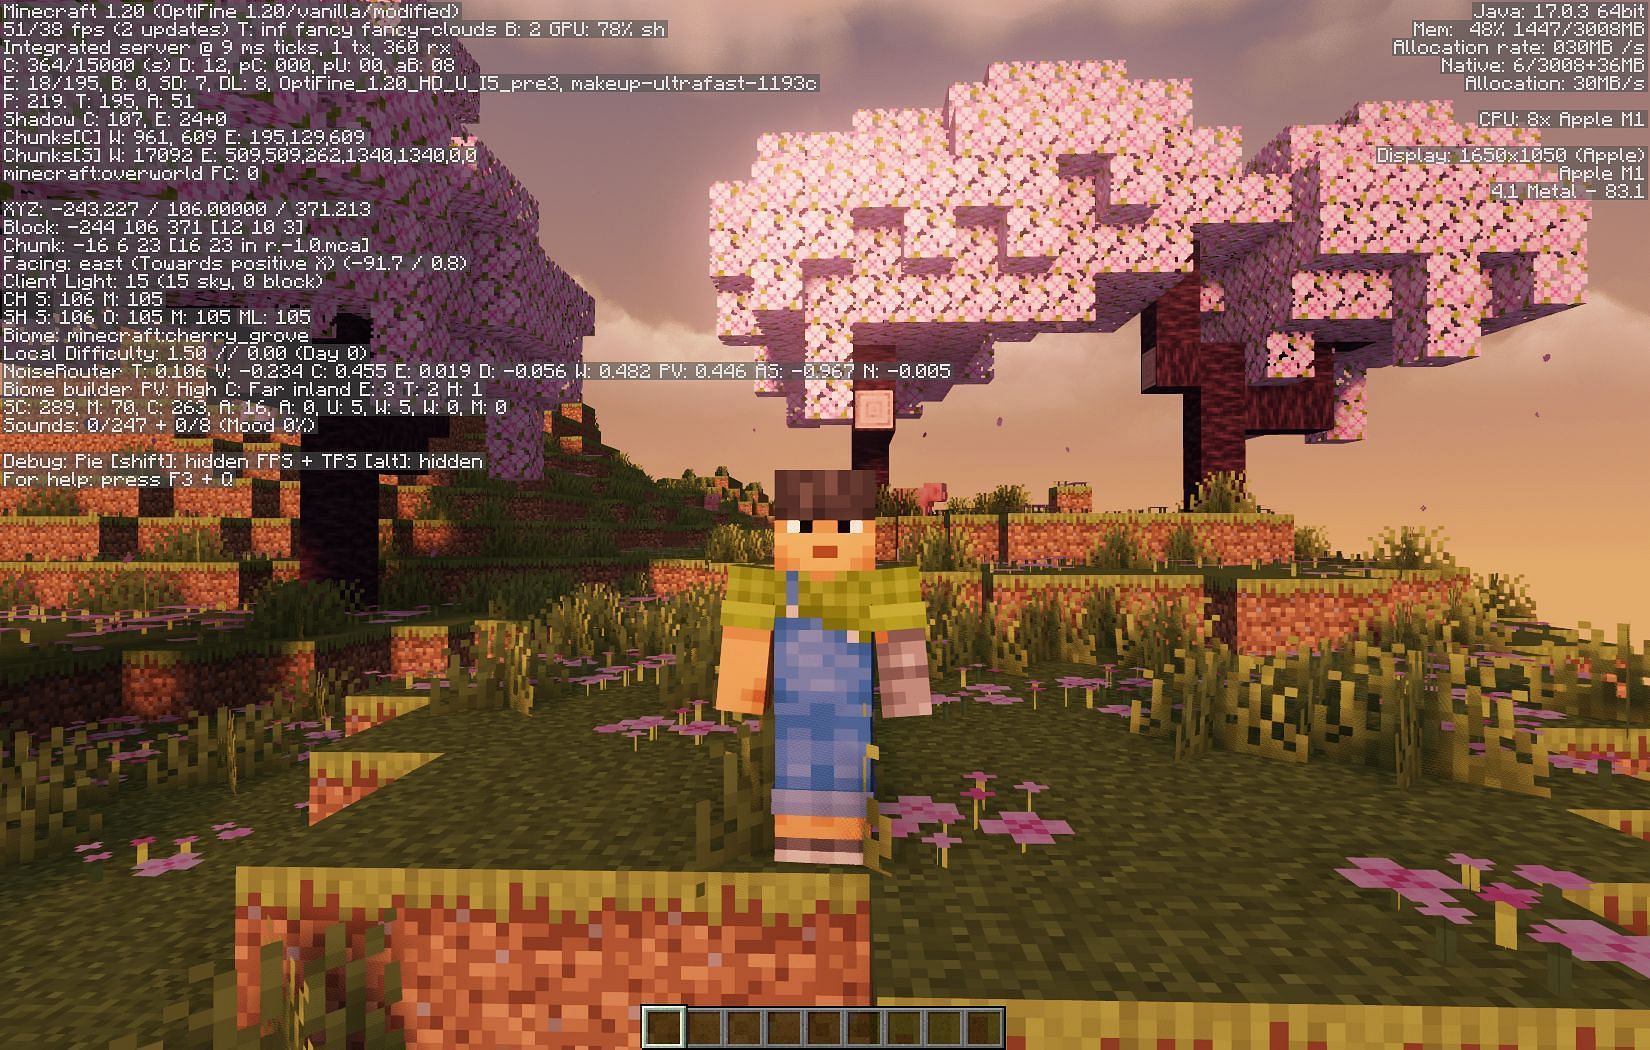 Screenshot of a simple and engaging minecraft gameplay